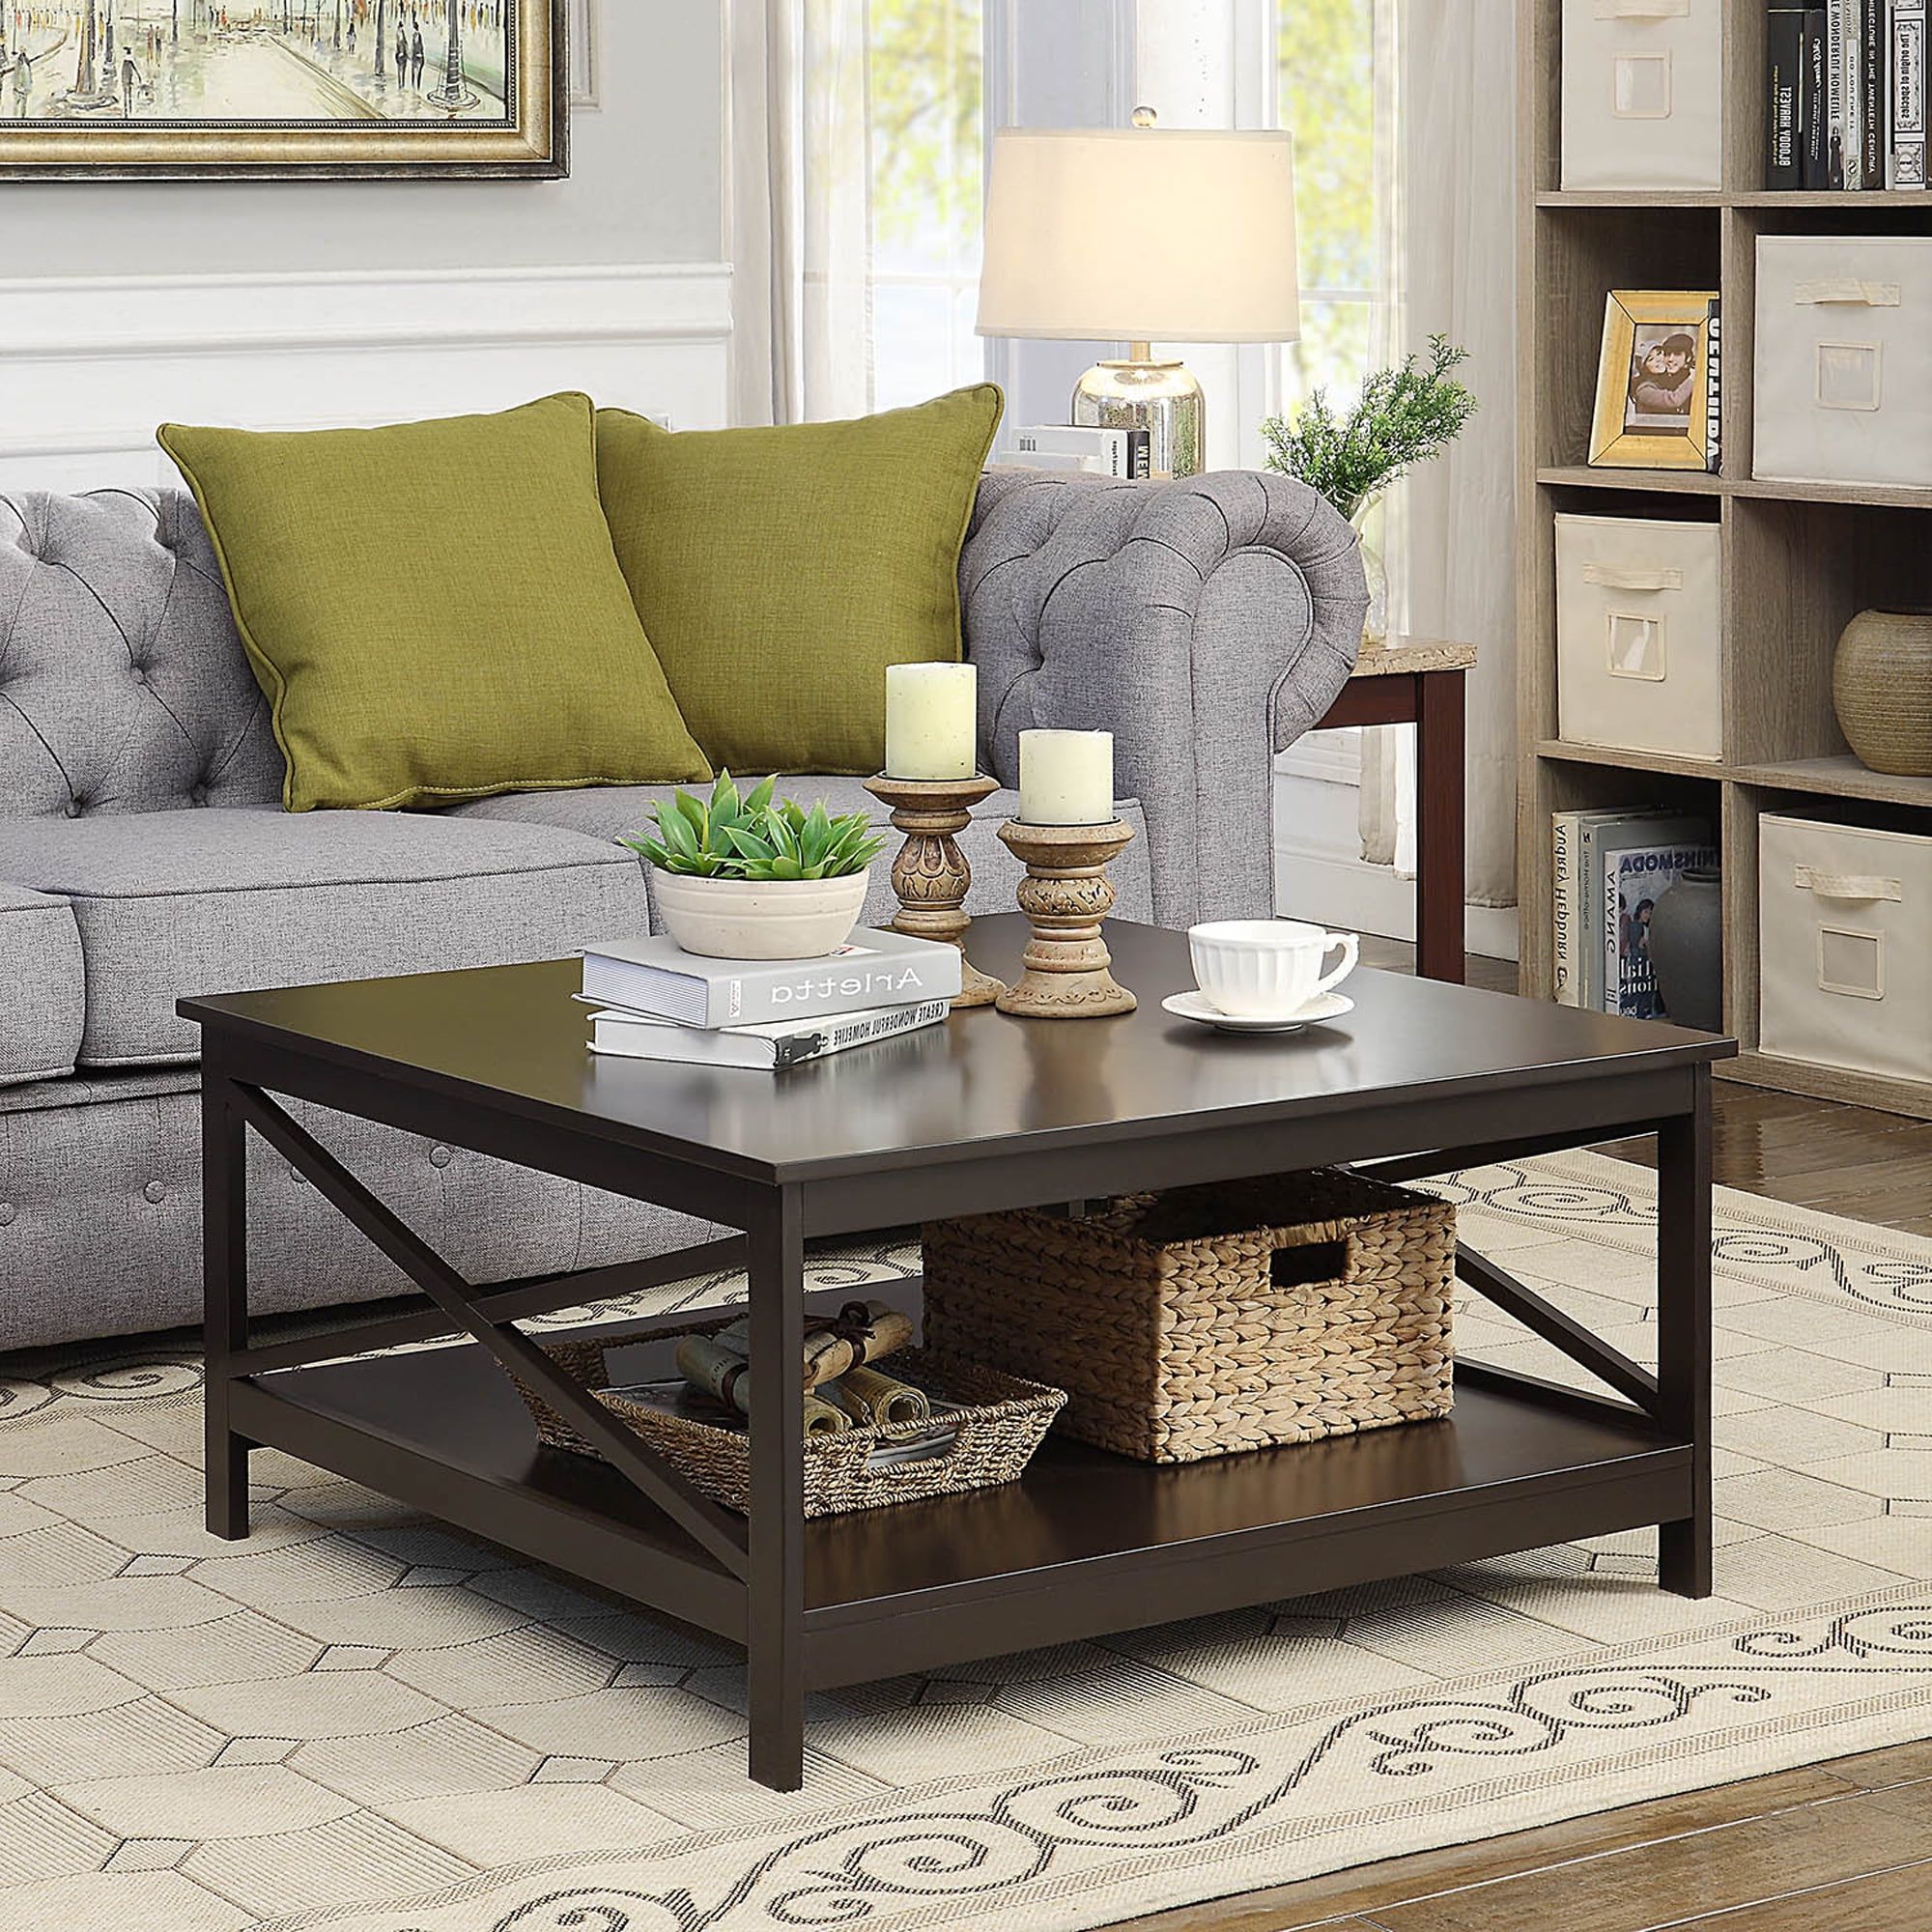 2020 Convenience Concepts Oxford Square Coffee Table – Walmart Regarding Transitional Square Coffee Tables (View 11 of 15)